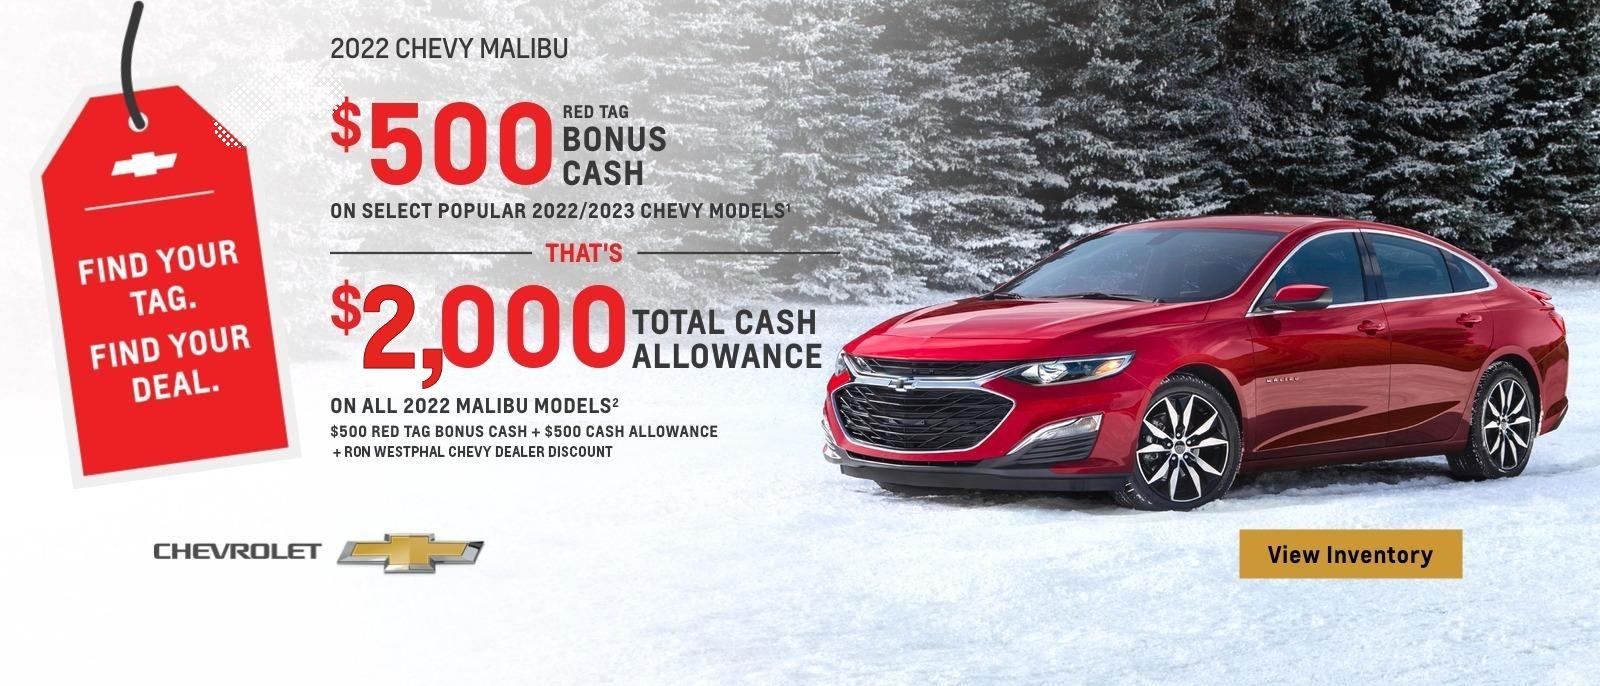 $500 Red Tag Bonus Cash on select popular 2022/2023 Chevy models. That's $2,000 total cash allowance on all 2022 Malibu models. $500 Red Tag Bonus Cash + $500 Cash Allowance